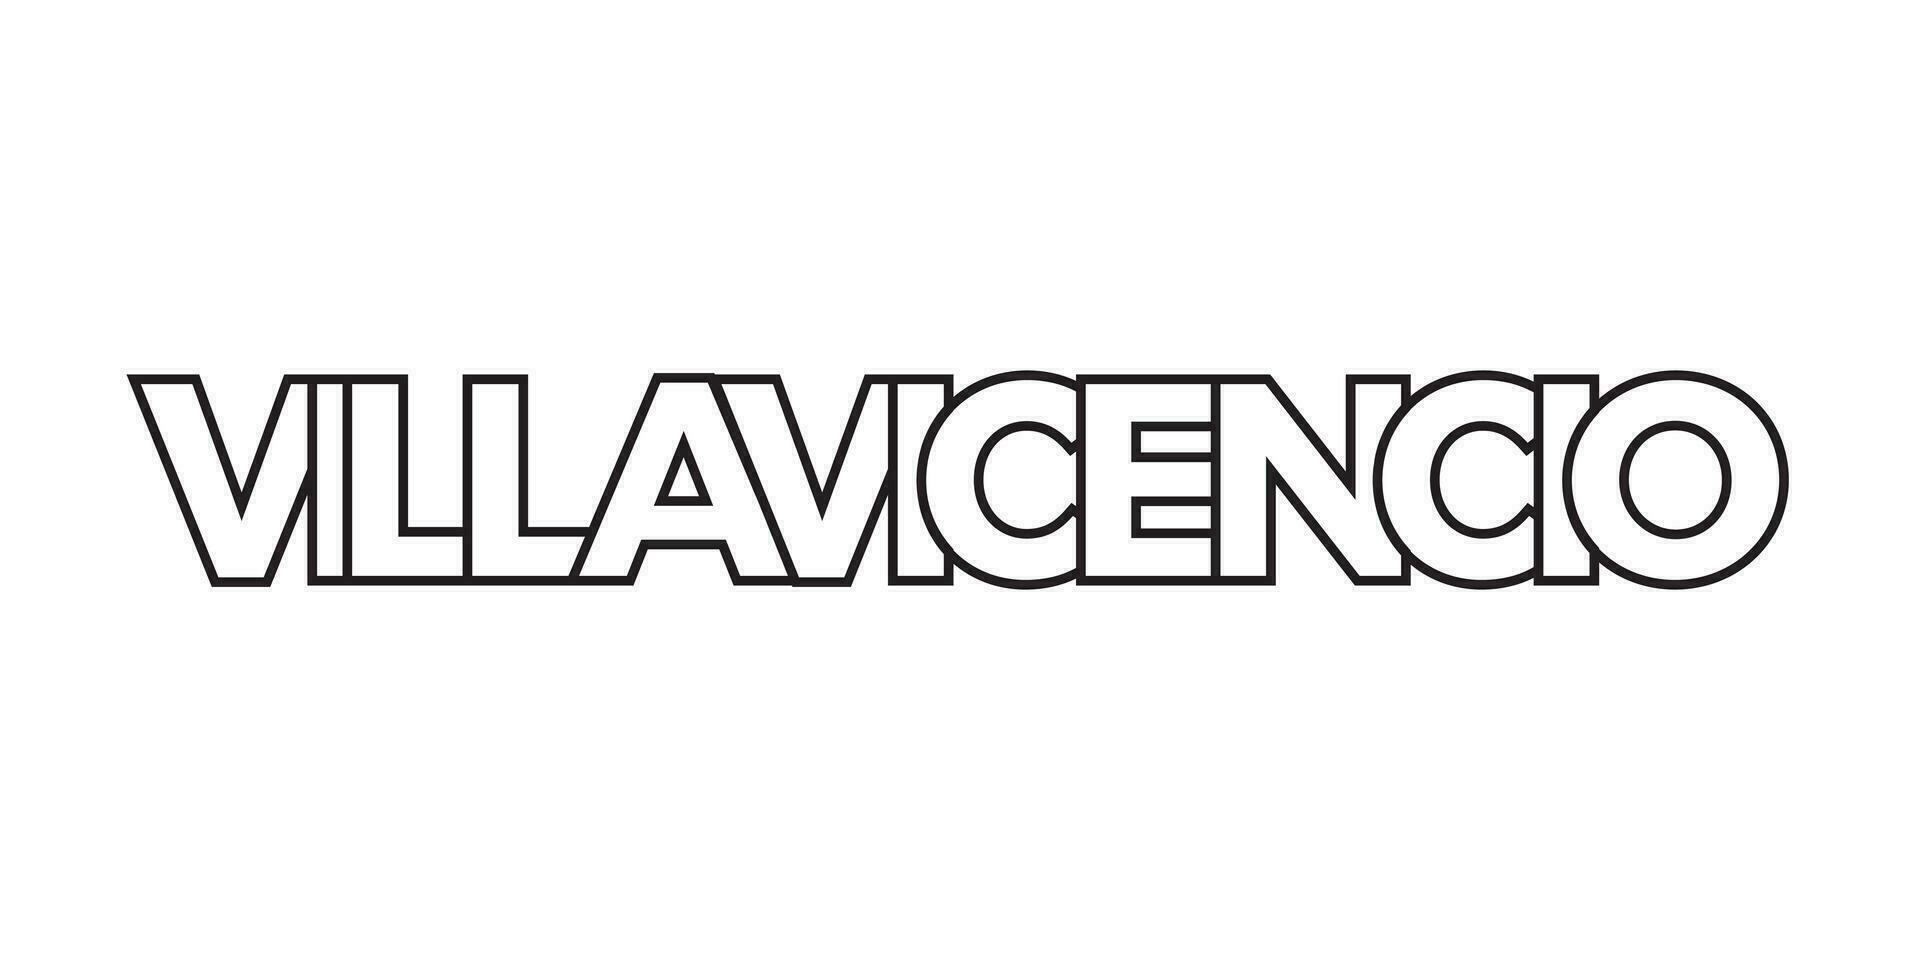 Villavicencio in the Colombia emblem. The design features a geometric style, vector illustration with bold typography in a modern font. The graphic slogan lettering.